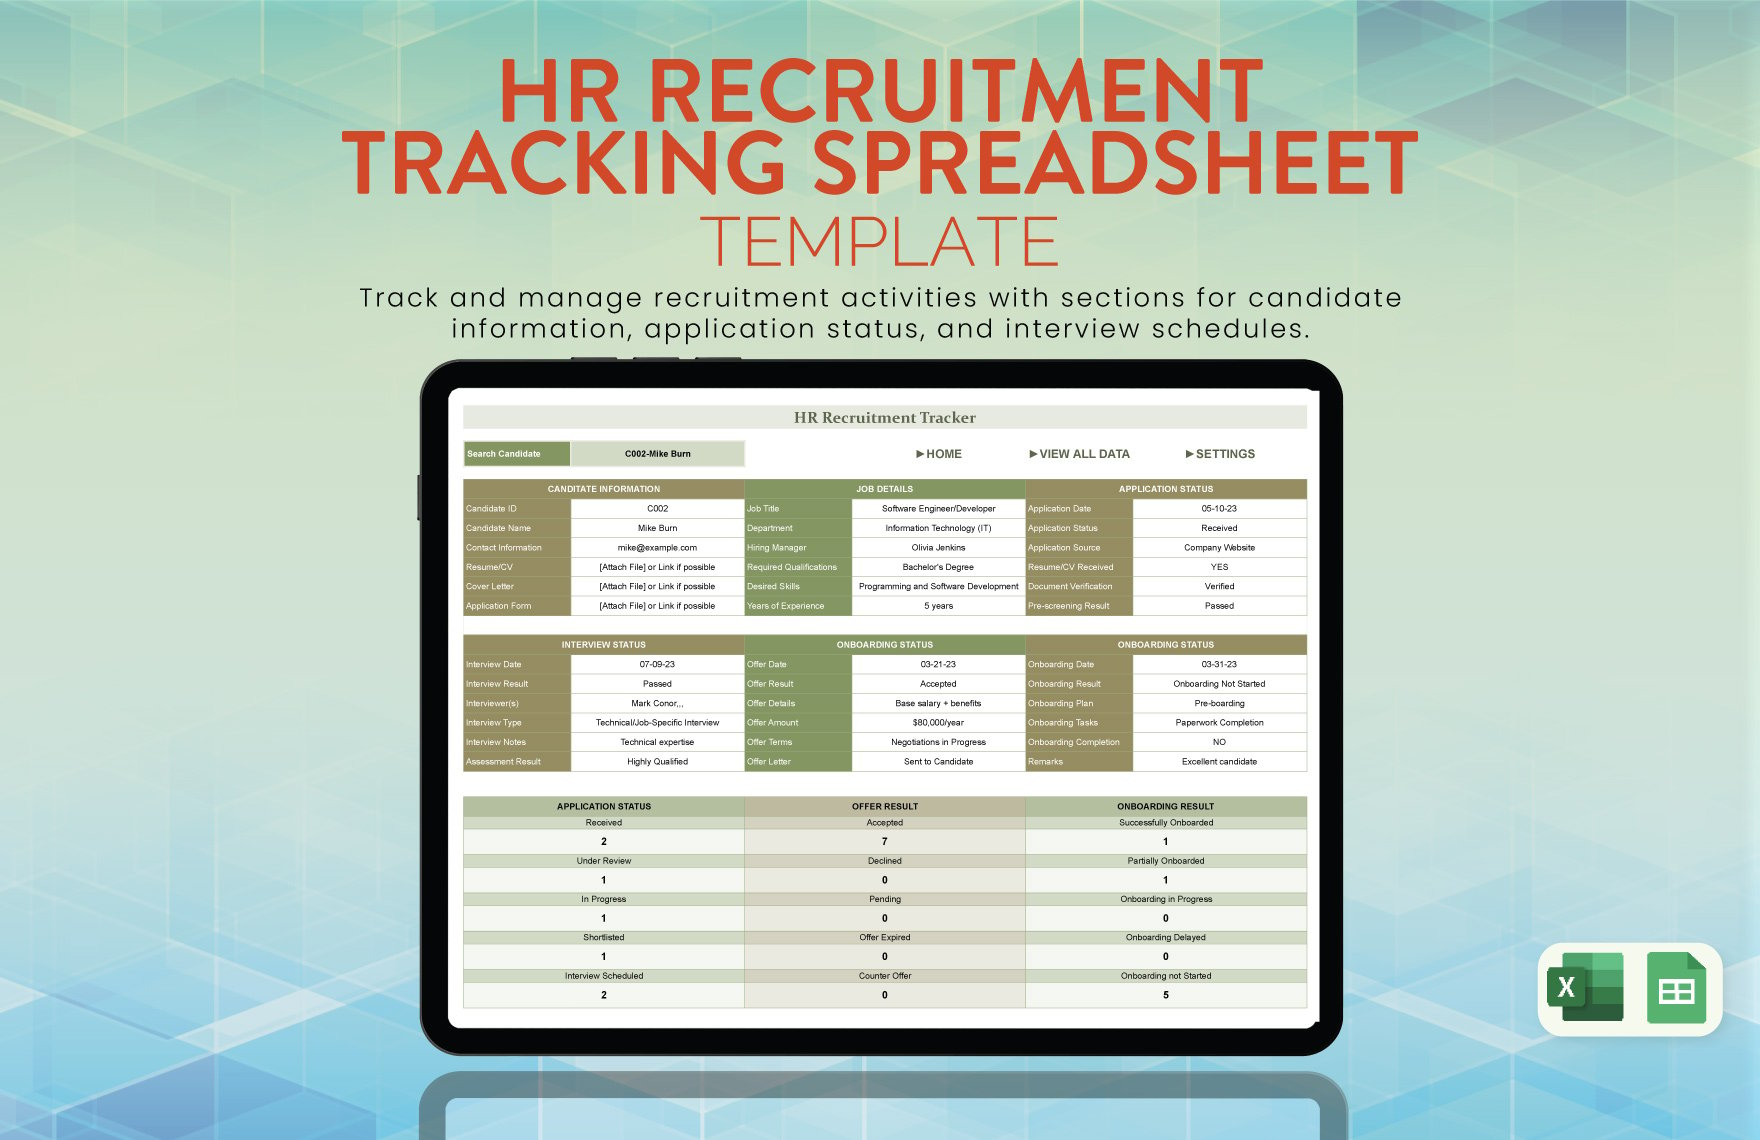 HR Recruitment Tracking Spreadsheet Template in Excel, Google Sheets